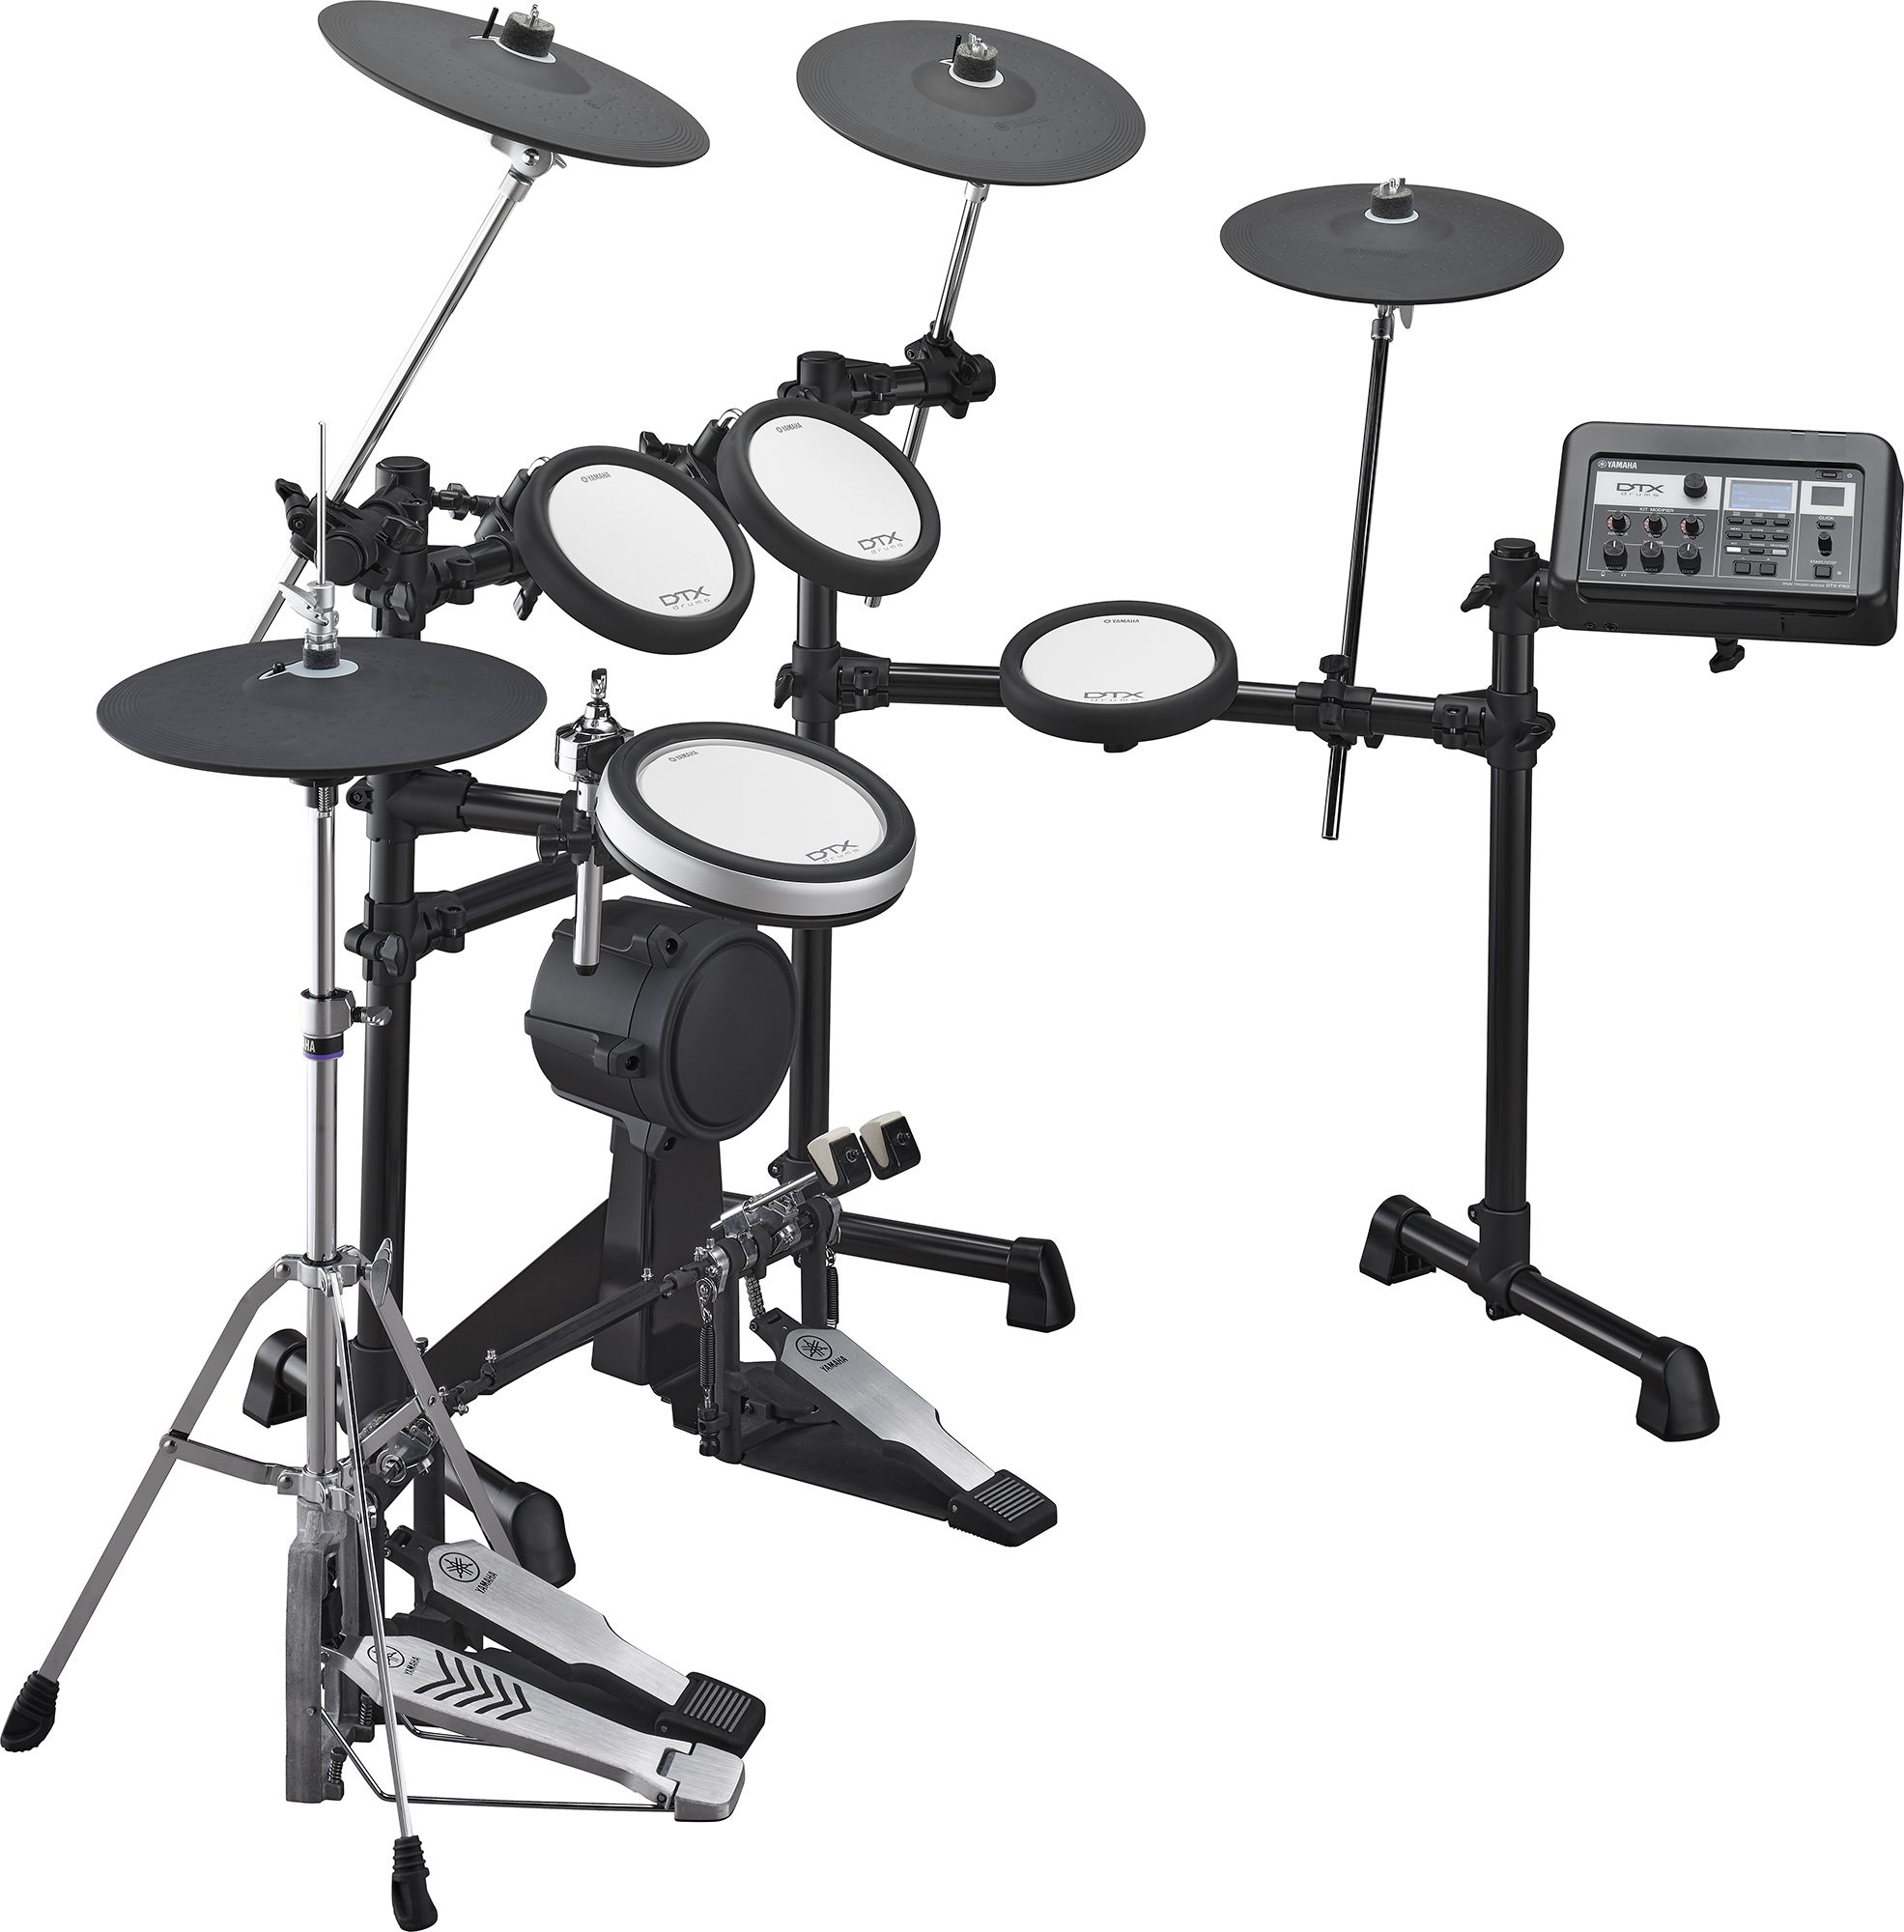 DTX6 Series - Products - Electronic Drum Kits - Electronic Drums - Drums -  Musical Instruments - Products - Yamaha - Africa / Asia / CIS / Latin  America / Middle East / Oceania | Musikinstrumente